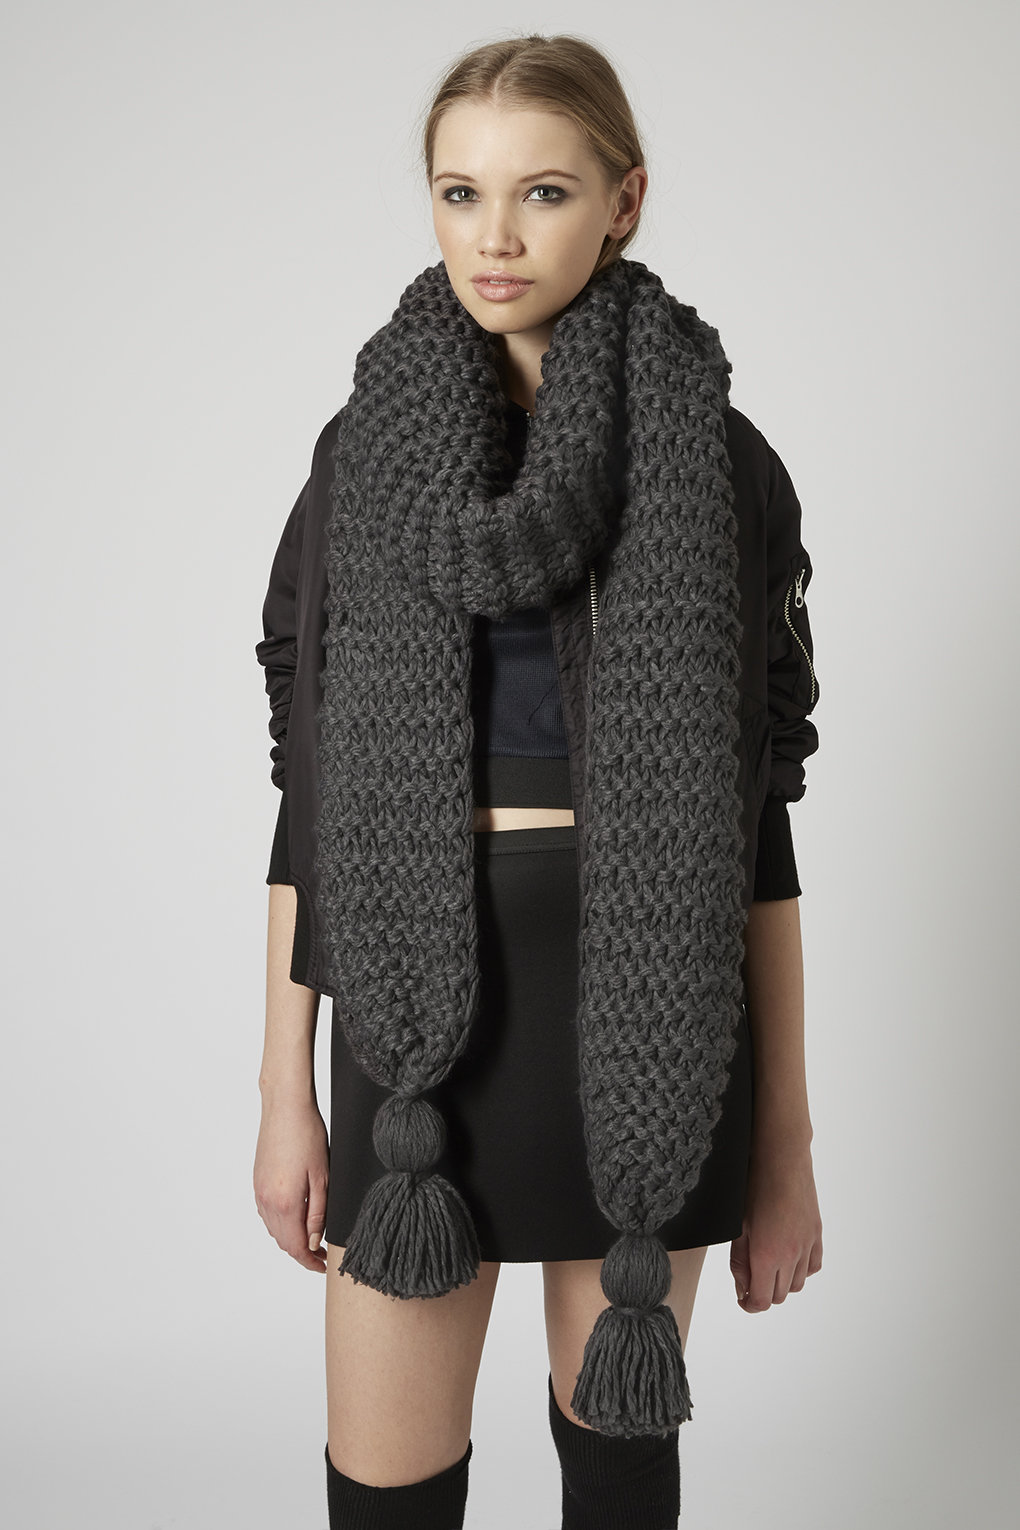 Thick Knit Scarf1 22+ Elegant Scarf Trend Forecast for Winter & Fall - 21